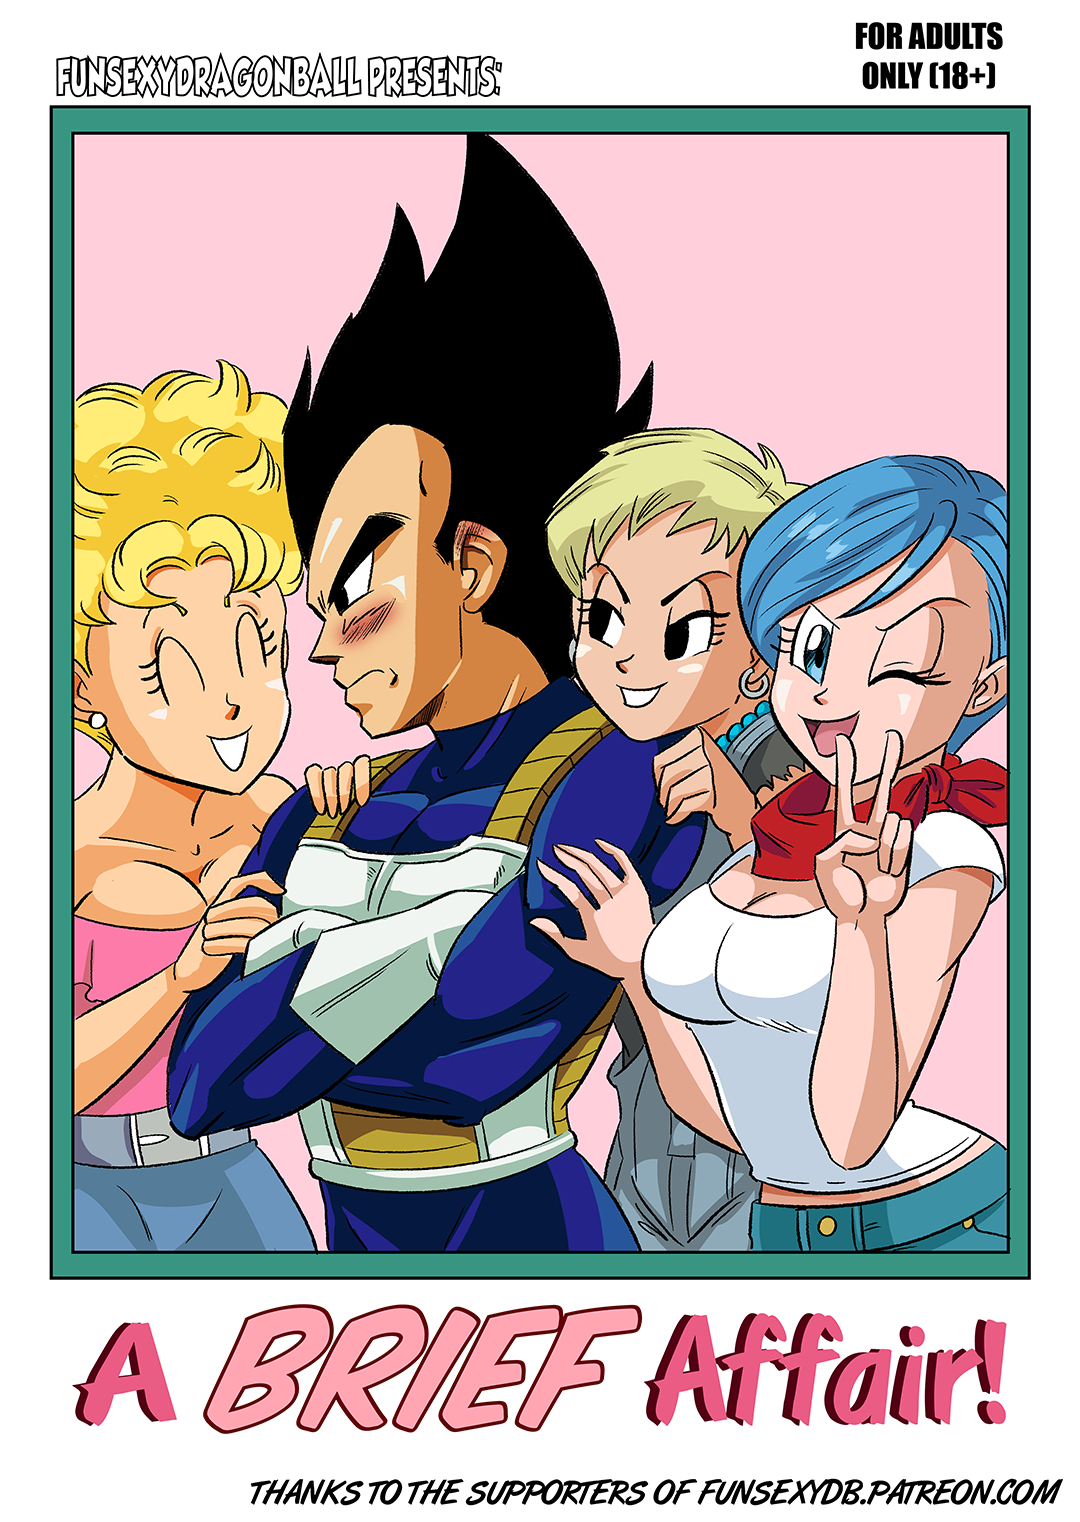 A Brief Affair - Ongoing from Funsexydragonball - 38 pages